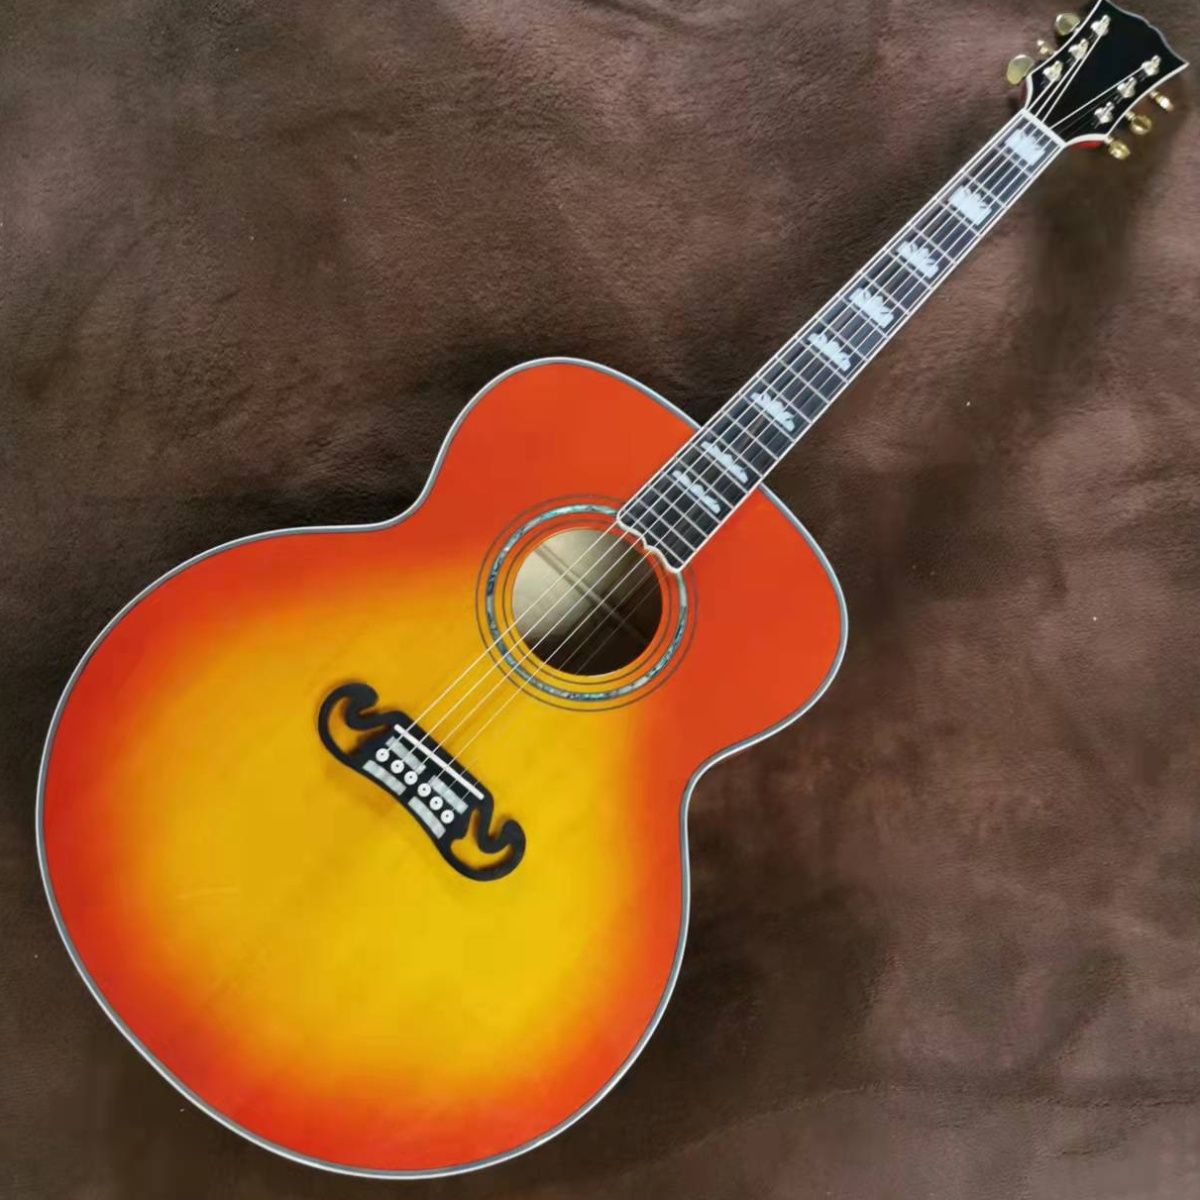 The 43 "sunset red J200 model refers to playing acoustic acoustic guitar